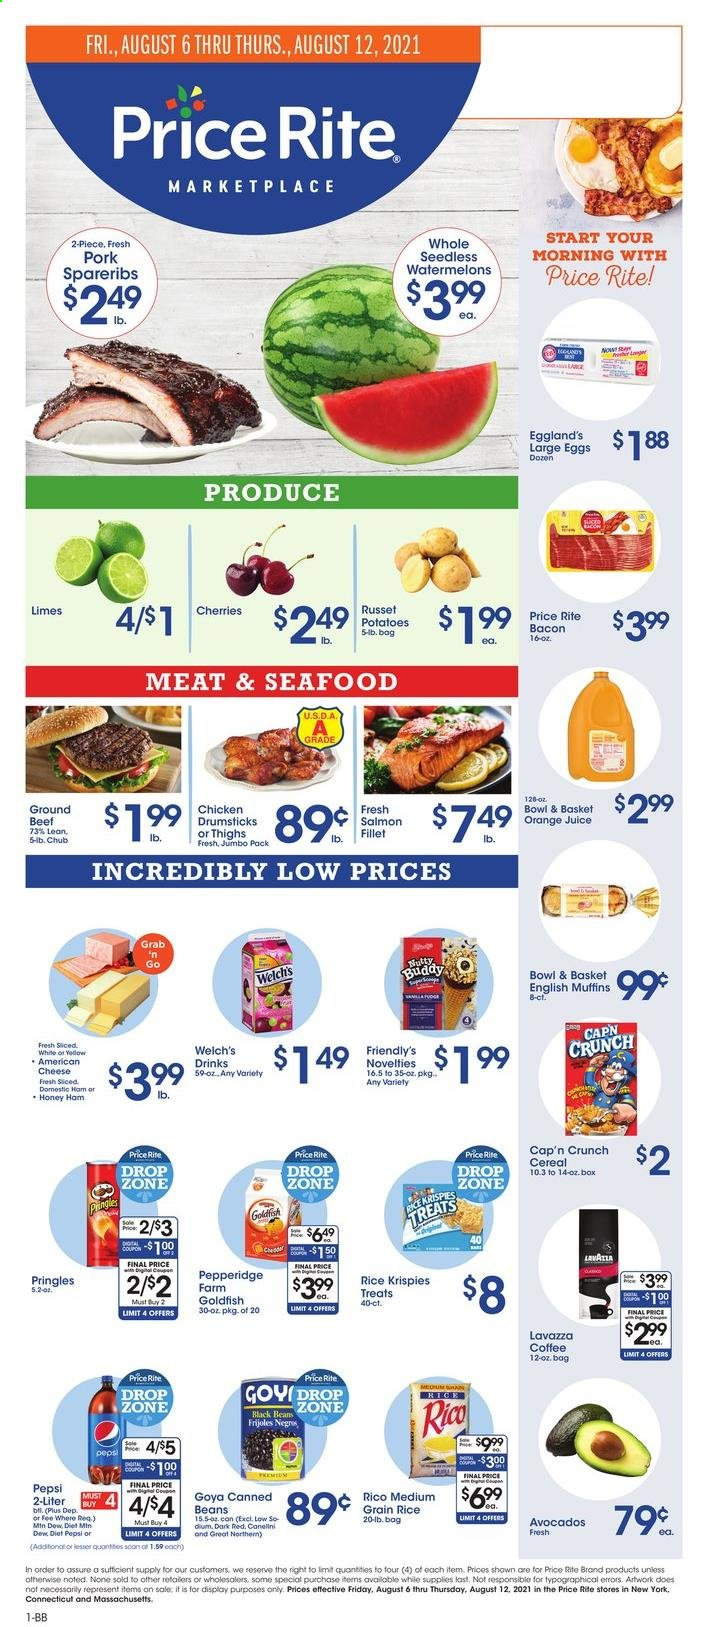 thumbnail - Price Rite Flyer - 08/06/2021 - 08/12/2021 - Sales products - english muffins, Bowl & Basket, russet potatoes, potatoes, avocado, limes, cherries, Welch's, salmon, seafood, bacon, ham, american cheese, cheese, large eggs, Friendly's Ice Cream, Pringles, Goldfish, black beans, Goya, cereals, Rice Krispies, Cap'n Crunch, medium grain rice, Pepsi, orange juice, juice, Diet Pepsi, coffee, Lavazza, chicken drumsticks, beef meat, ground beef, pork spare ribs. Page 1.